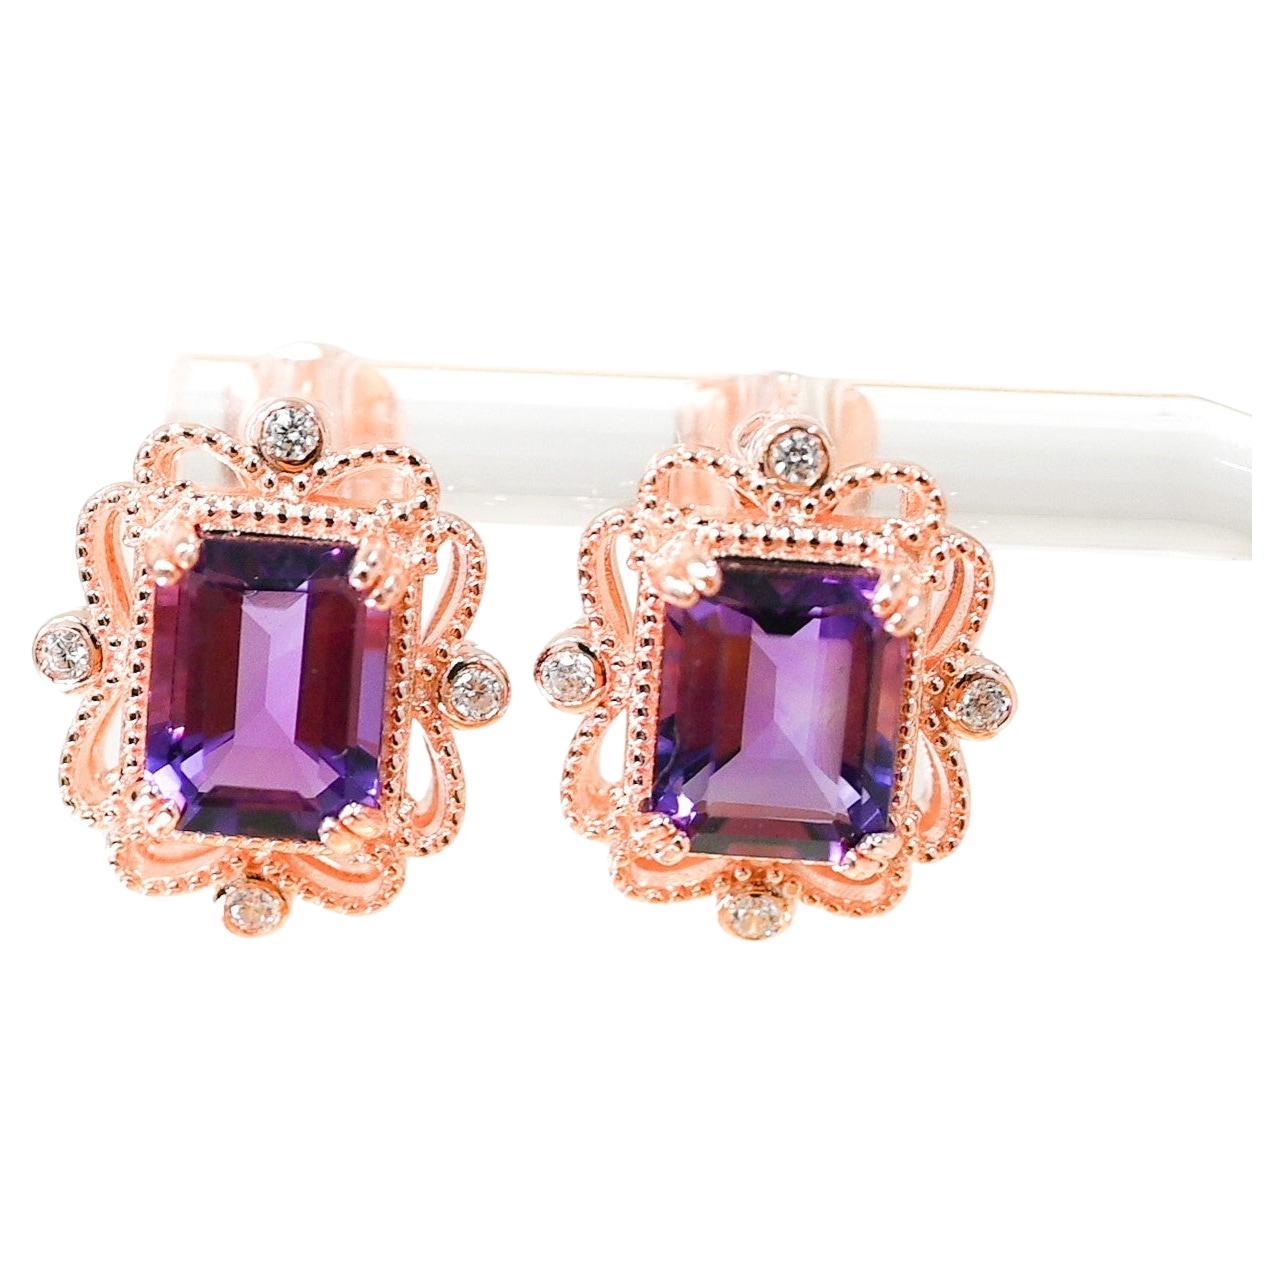 4.51 Cts Natural Amethyst 18K Rose Gold Plated Wedding Bridal Earrings Jewelry 